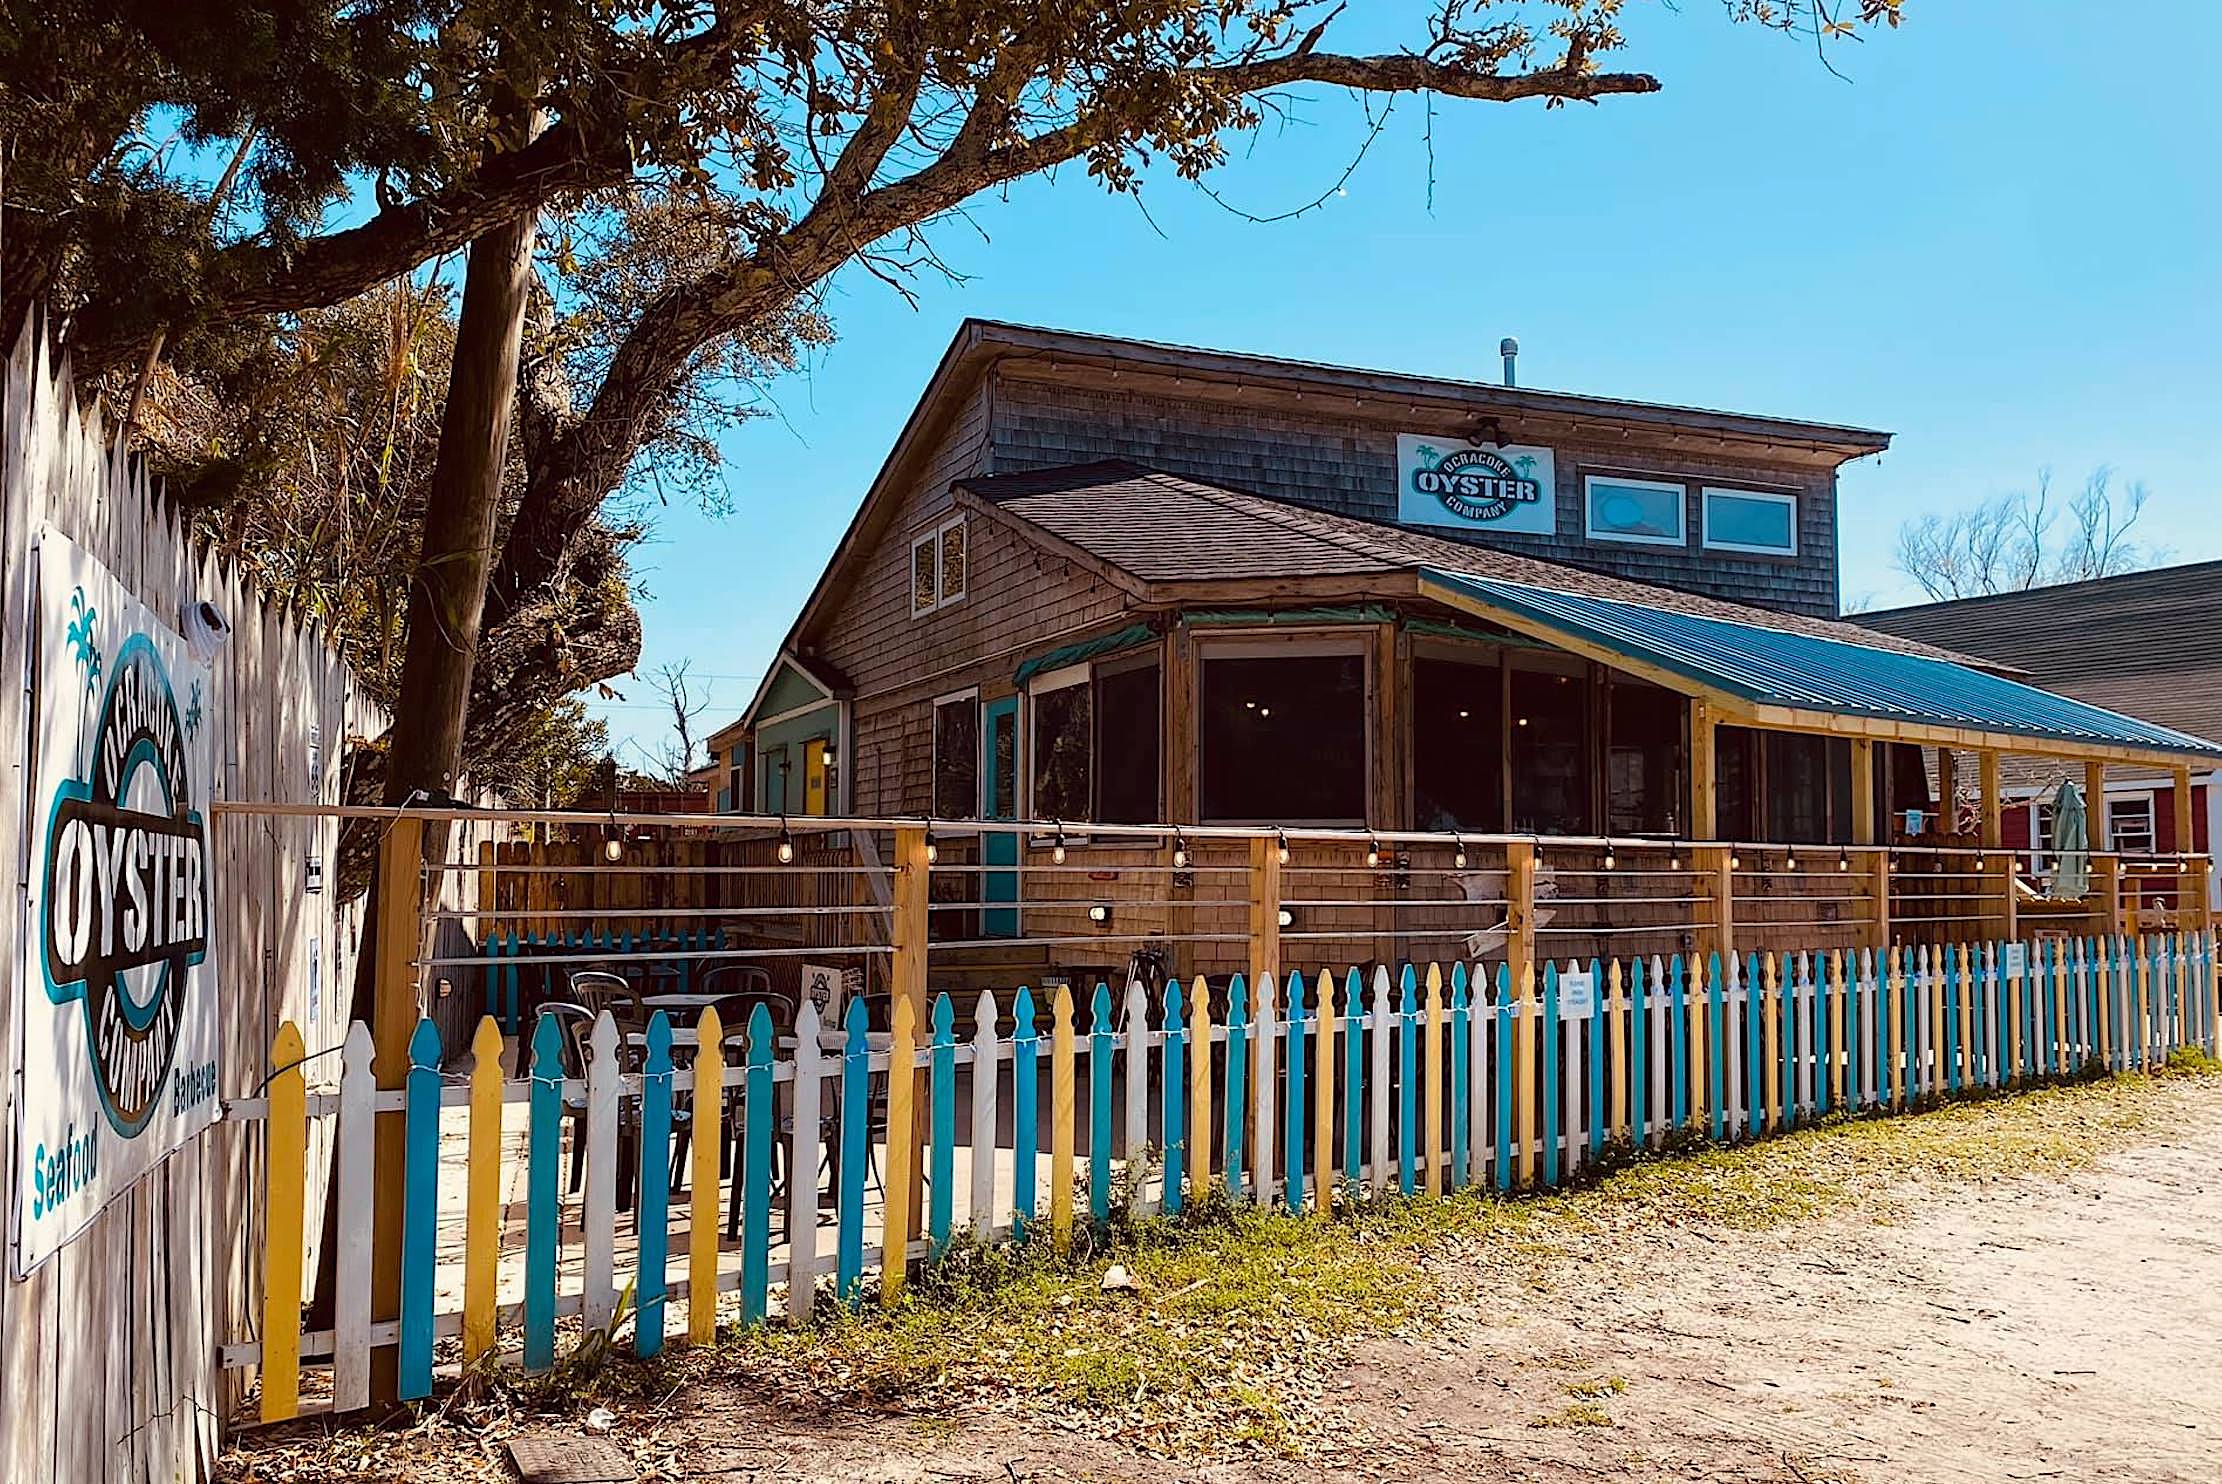 exterior image: Where the “oyster stout” beer flows: Ocracoke Oyster Company.